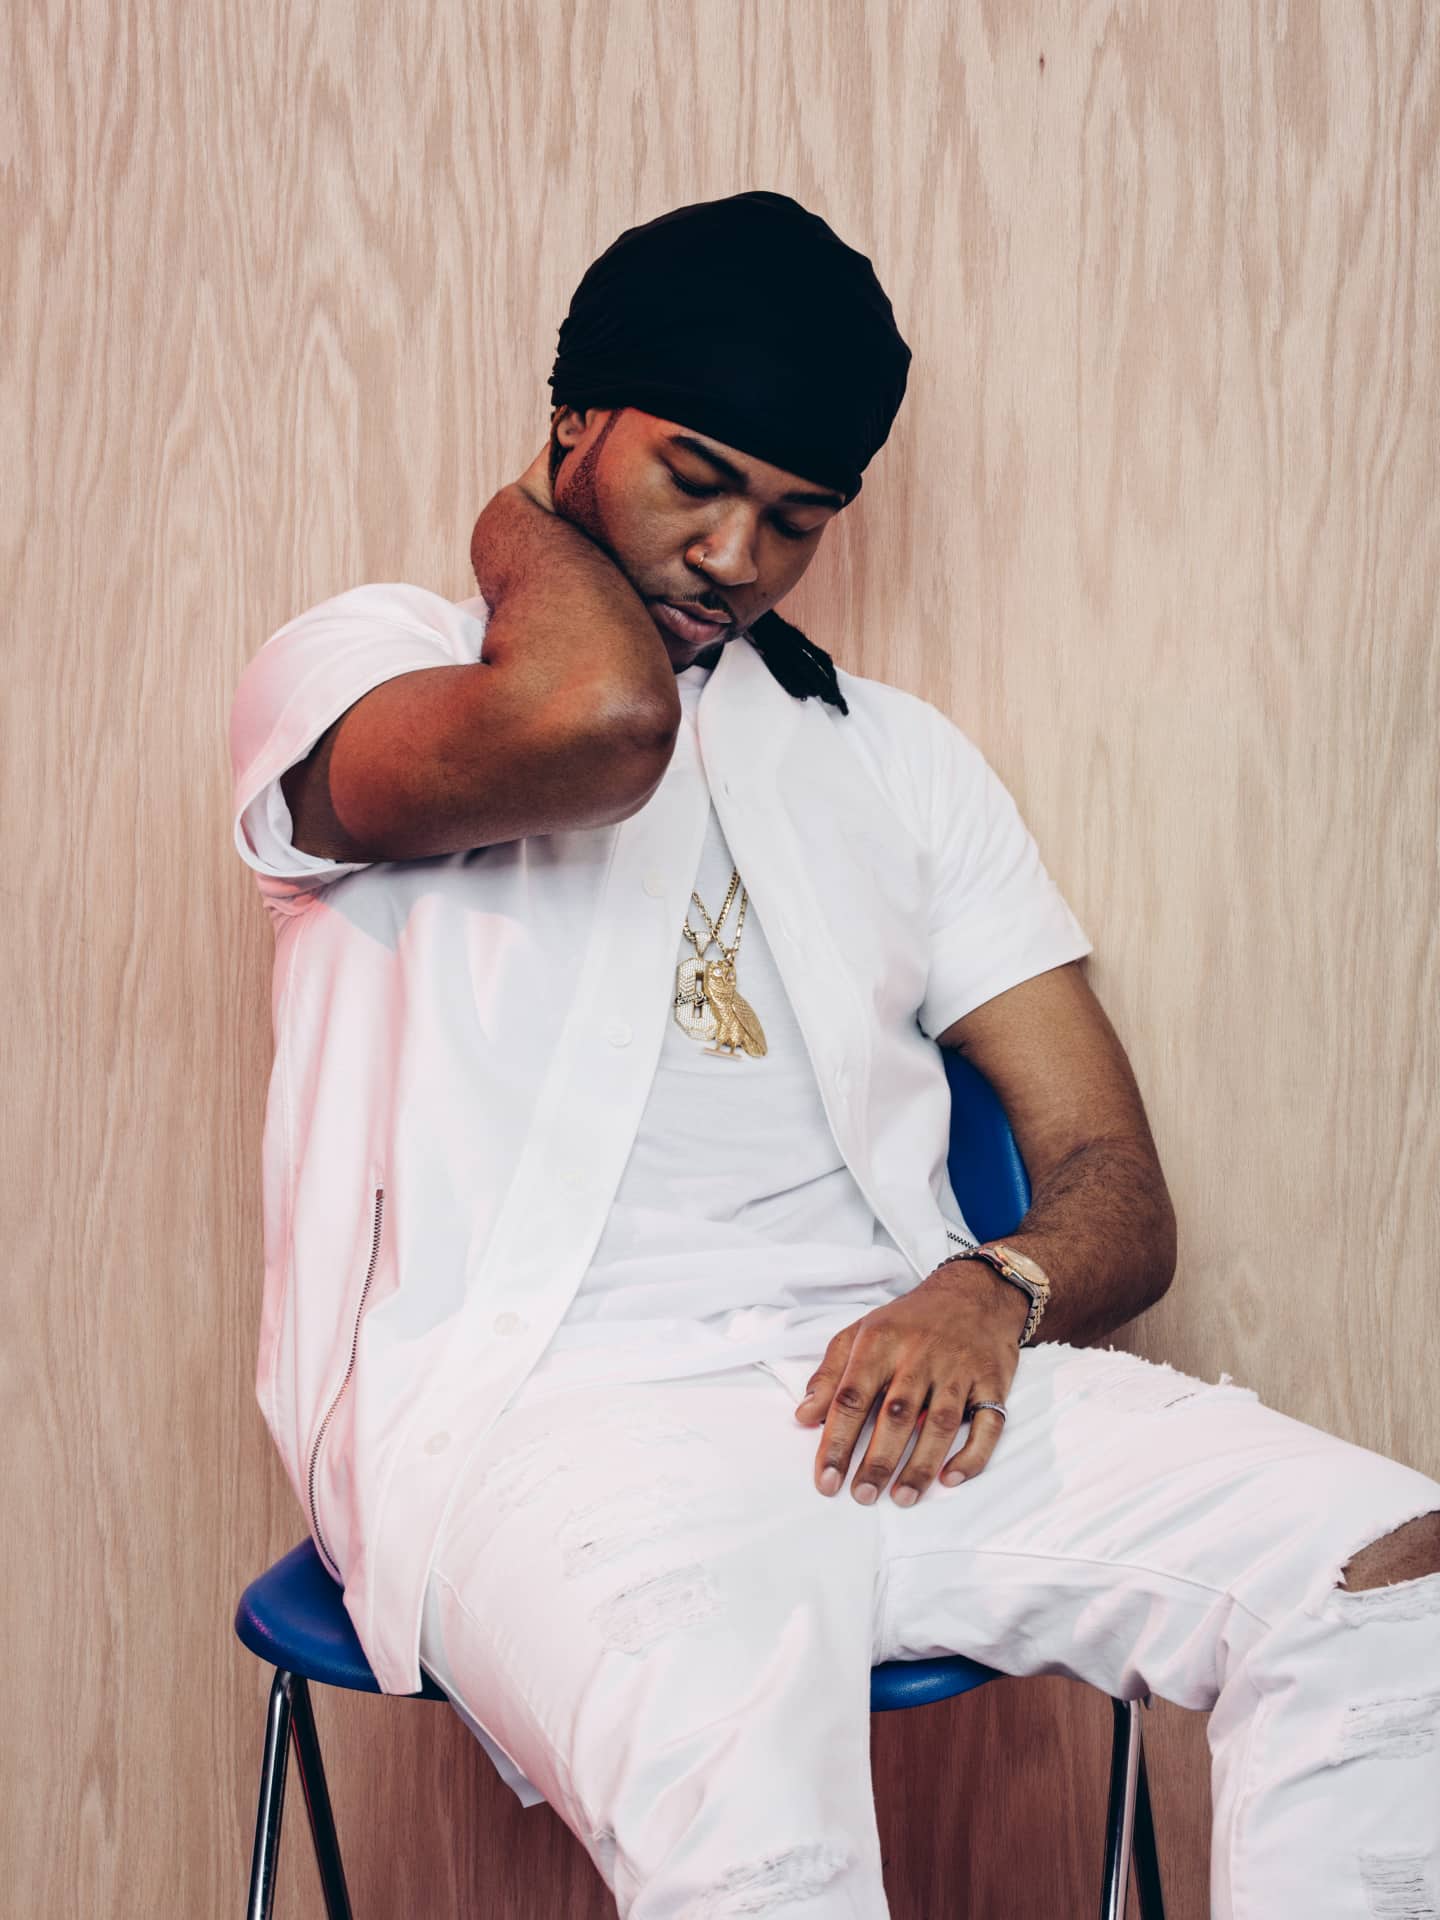 PARTYNEXTDOOR Speaks About His Music For The First Time | The FADER